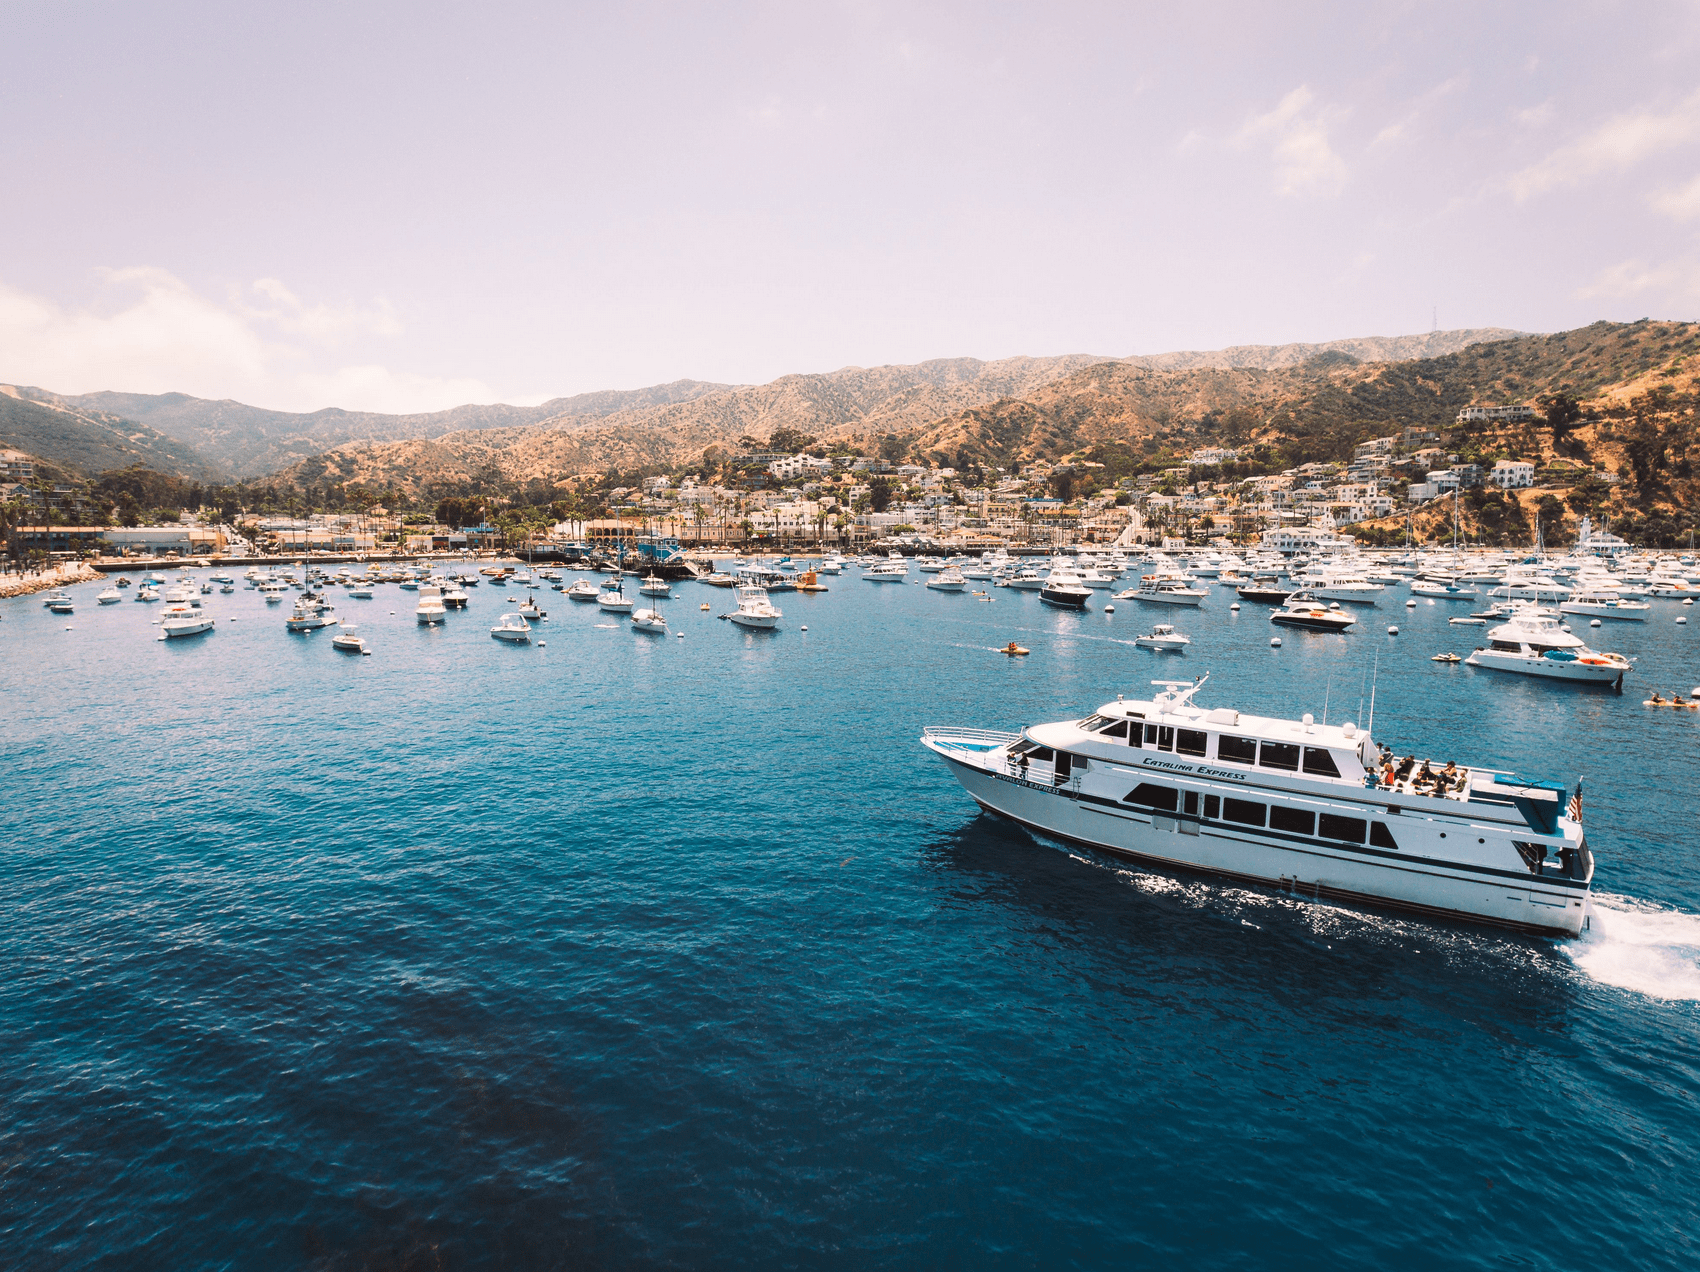 An image of the Catalina Express heading to the port of Catalina Island. 